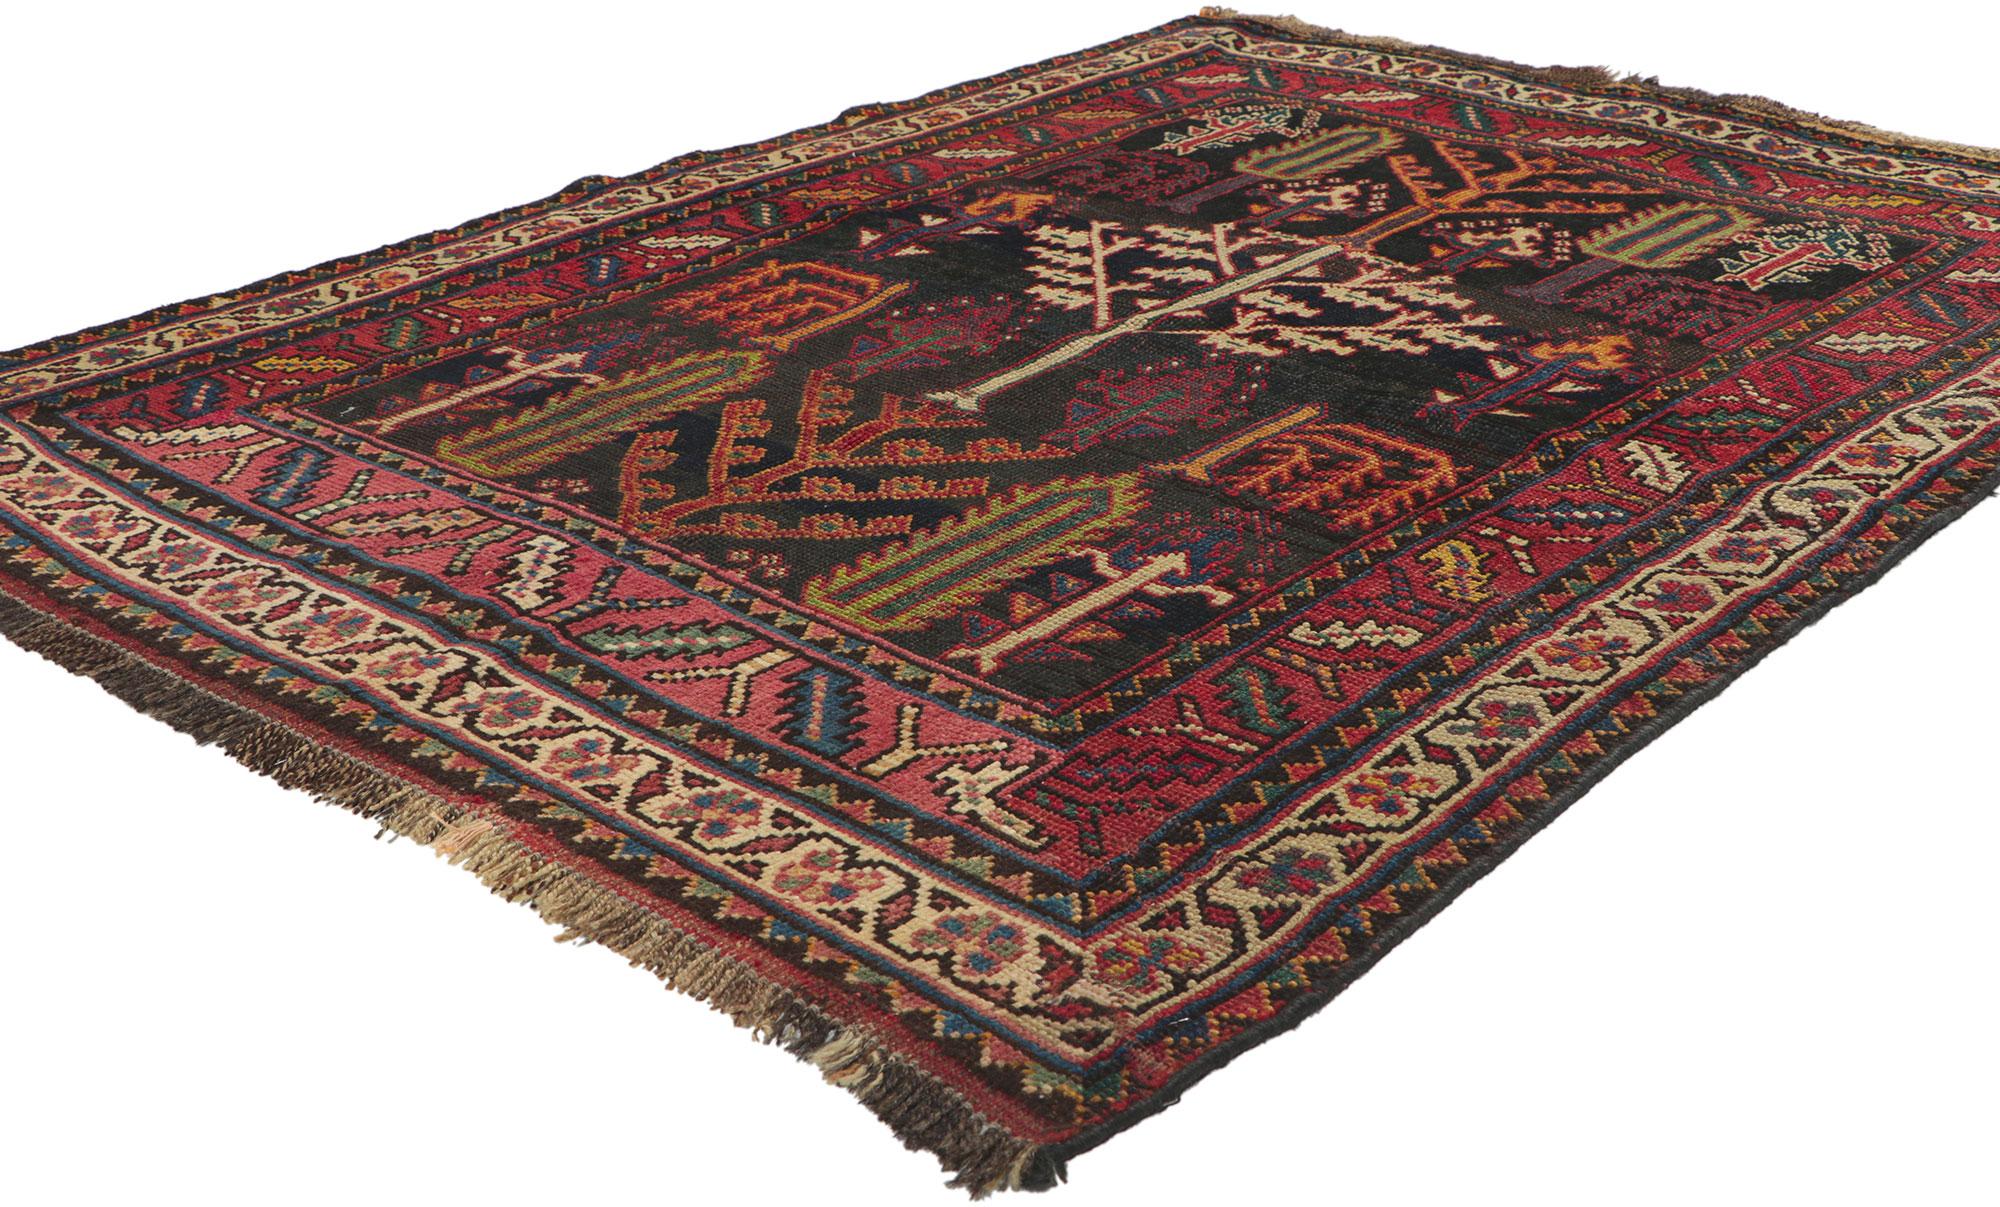 61083 antique Persian Shiraz rug with tree of life design, 04'00 x 05'00. Embodying tribal style and nomadic charm, this hand knotted wool antique Persian Shiraz rug is a captivating vision of woven beauty. The abrashed field features an all-over